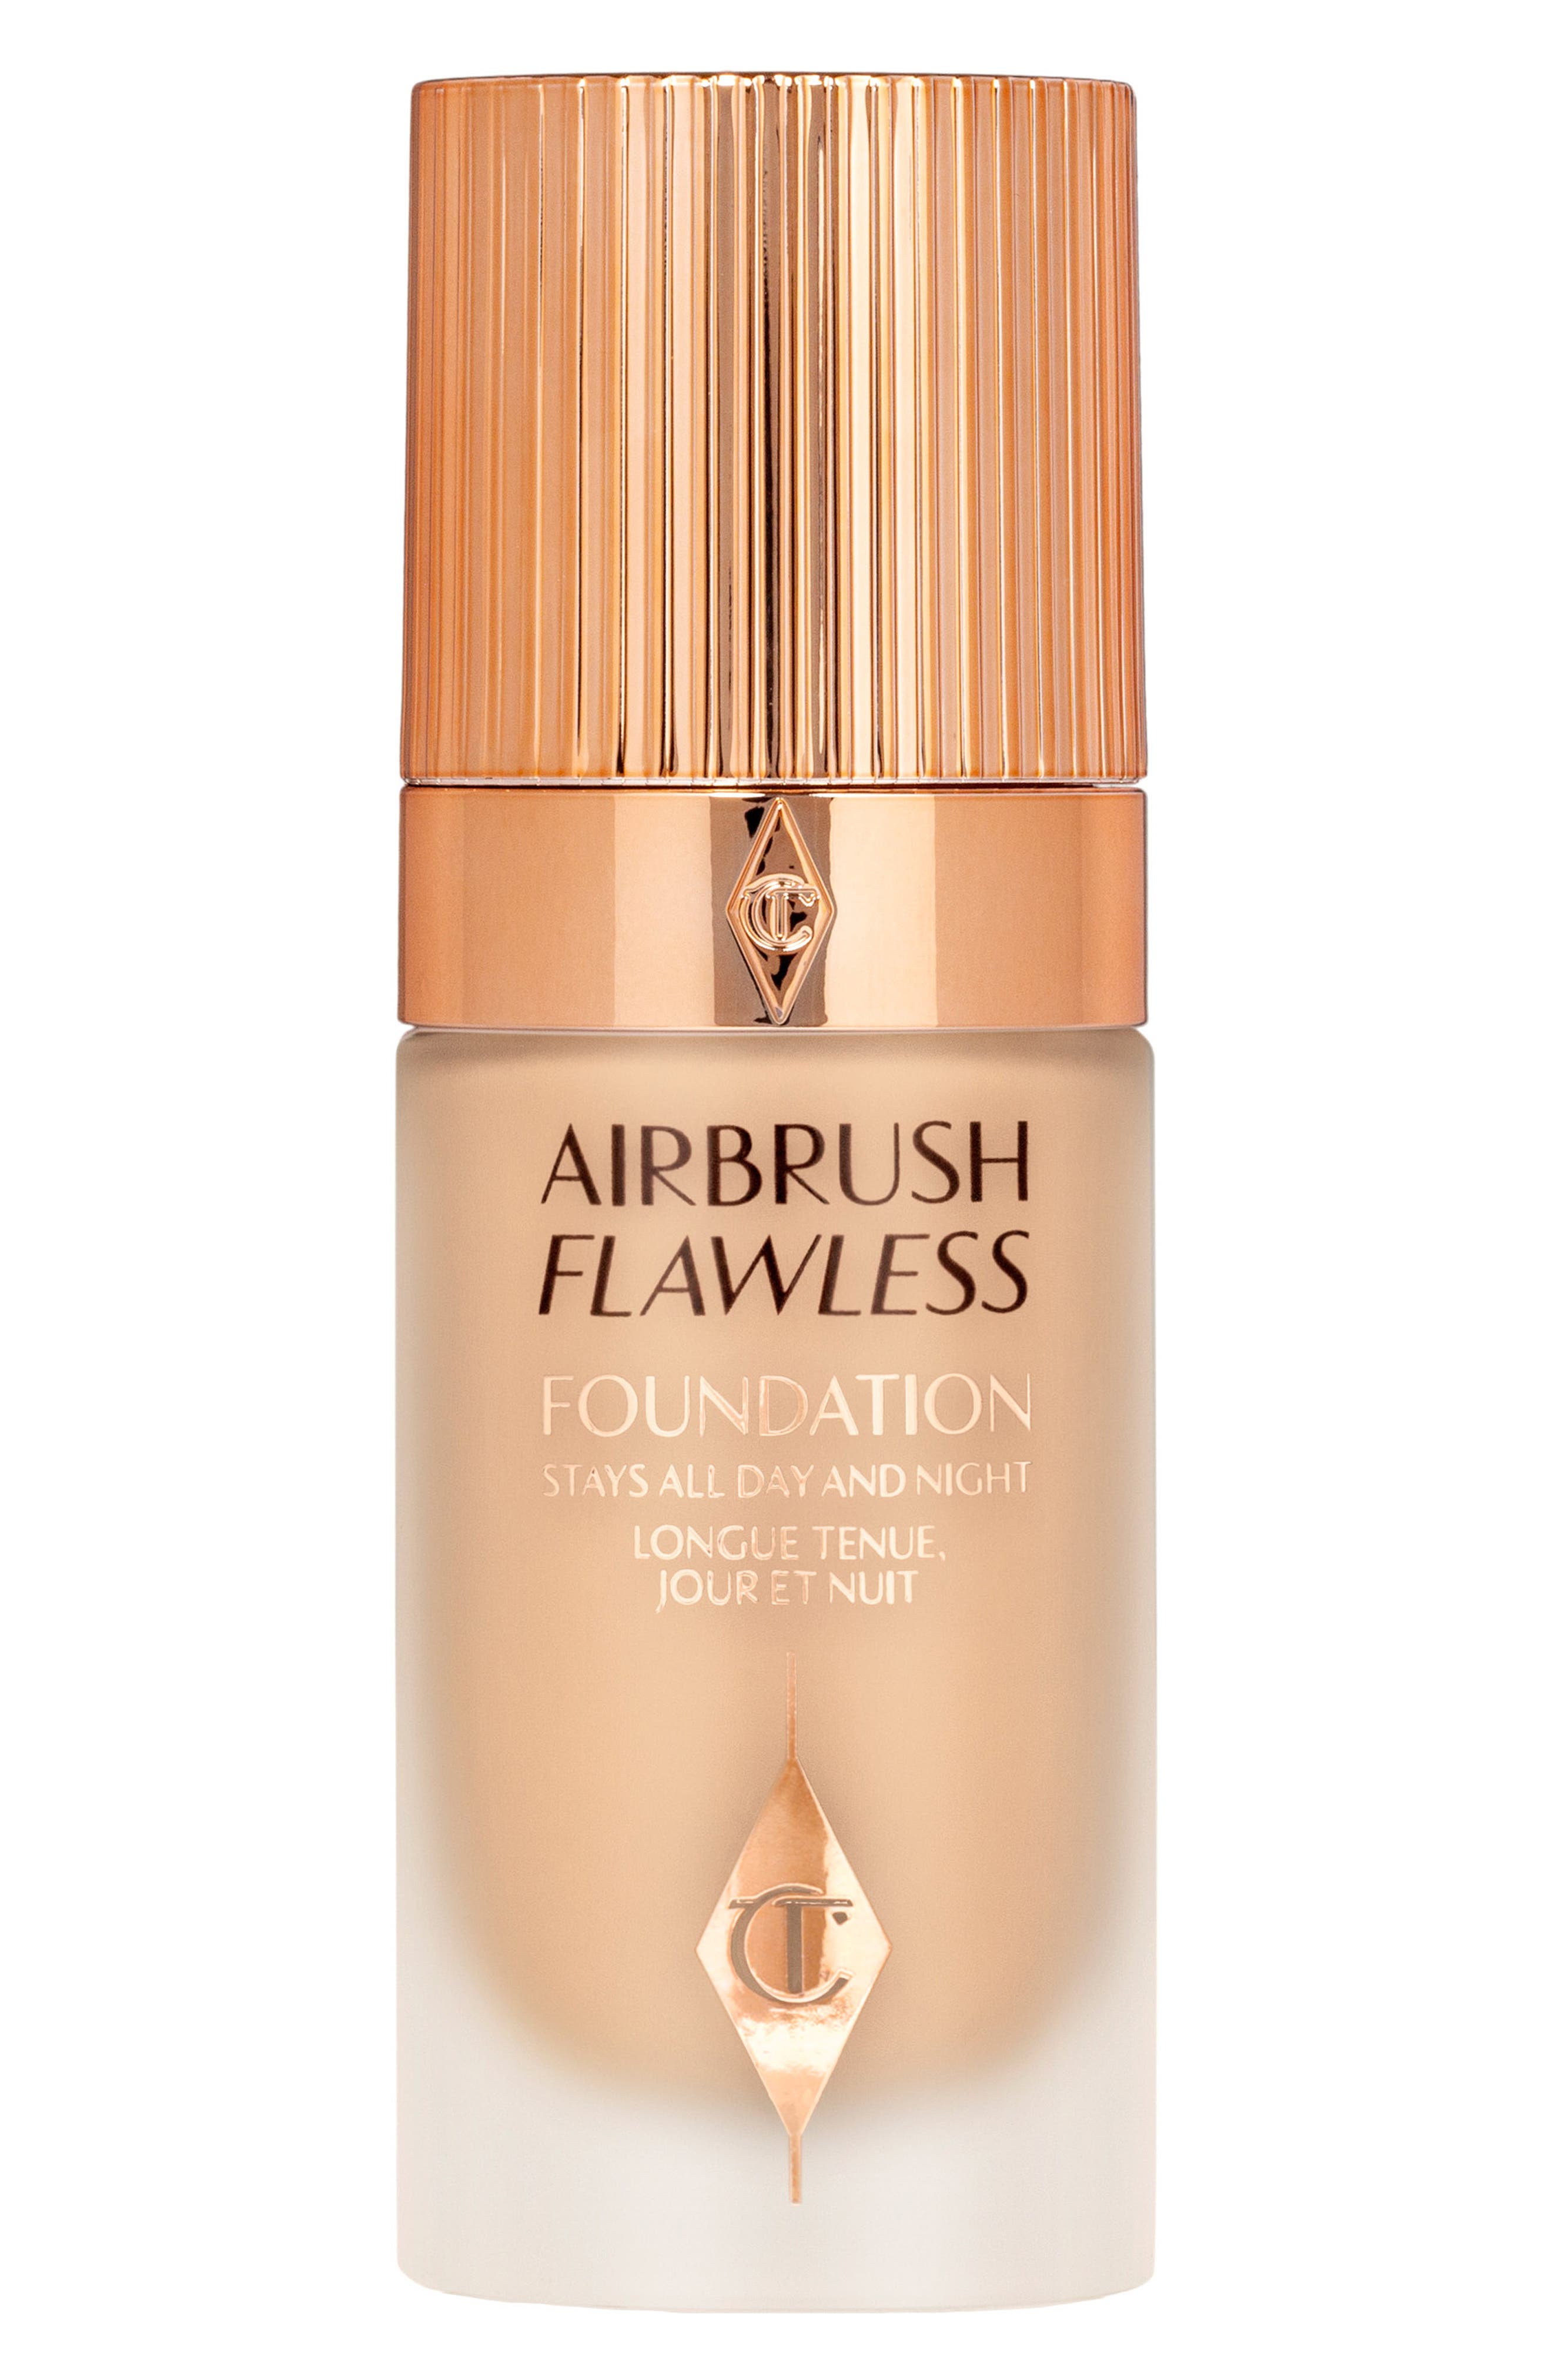 Charlotte Tilbury Airbrush Flawless Foundation in 06 Neutral